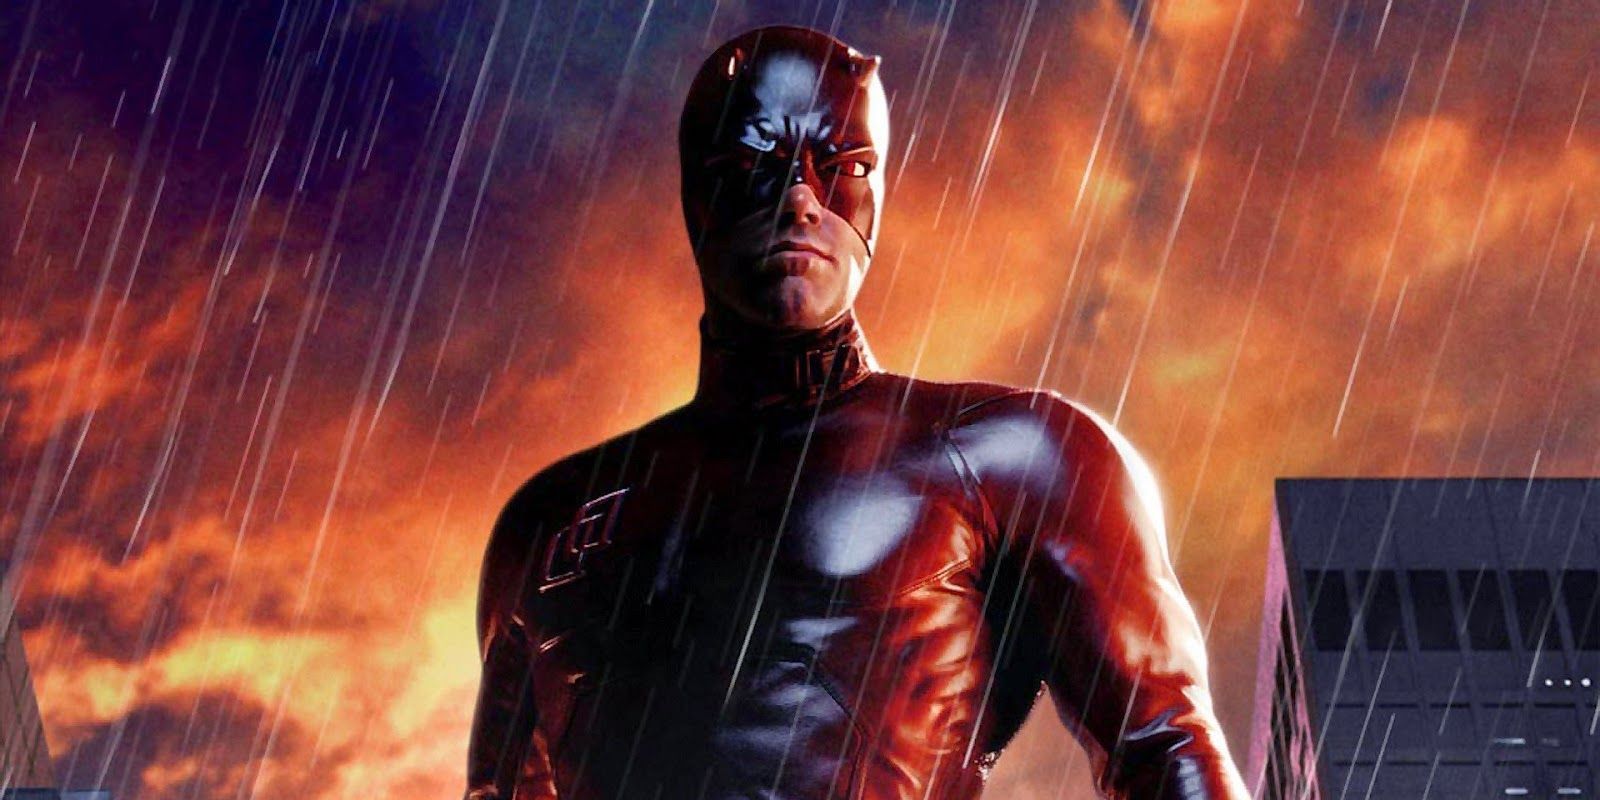 Troy Baker Wants To Voice Daredevil In a Marvel Video Game